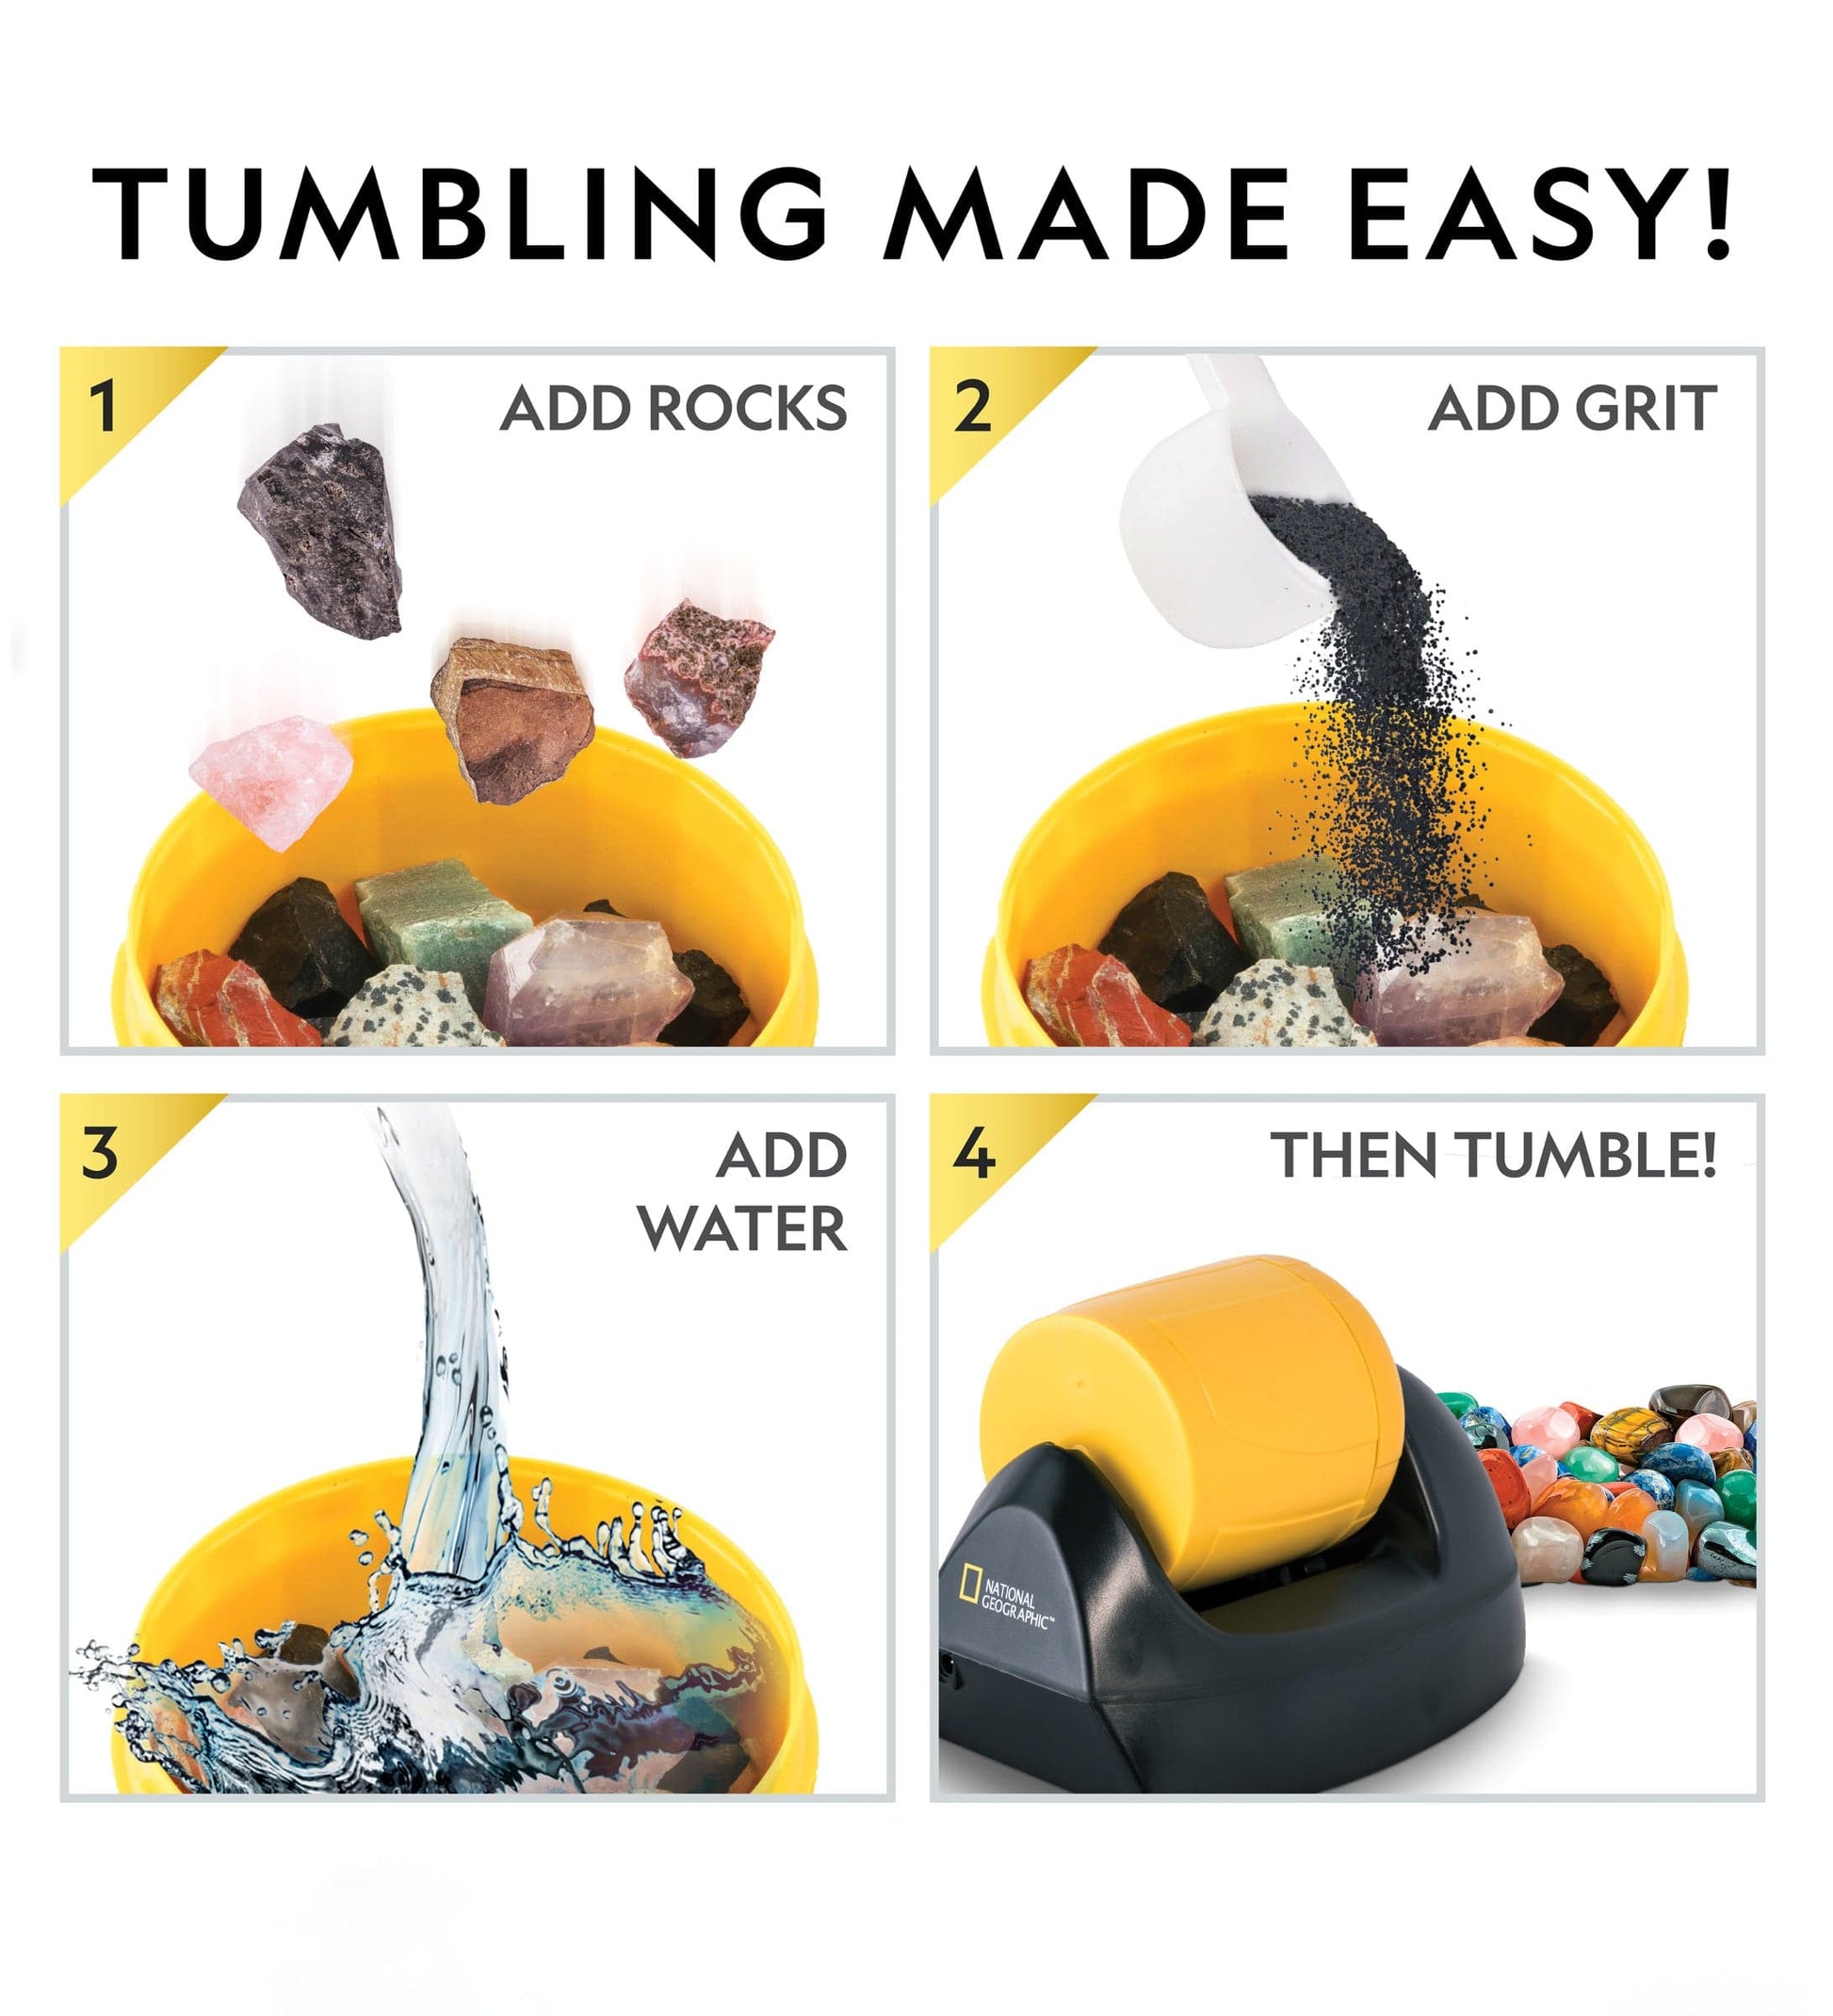  A site for rocking tumbling enthusiasts